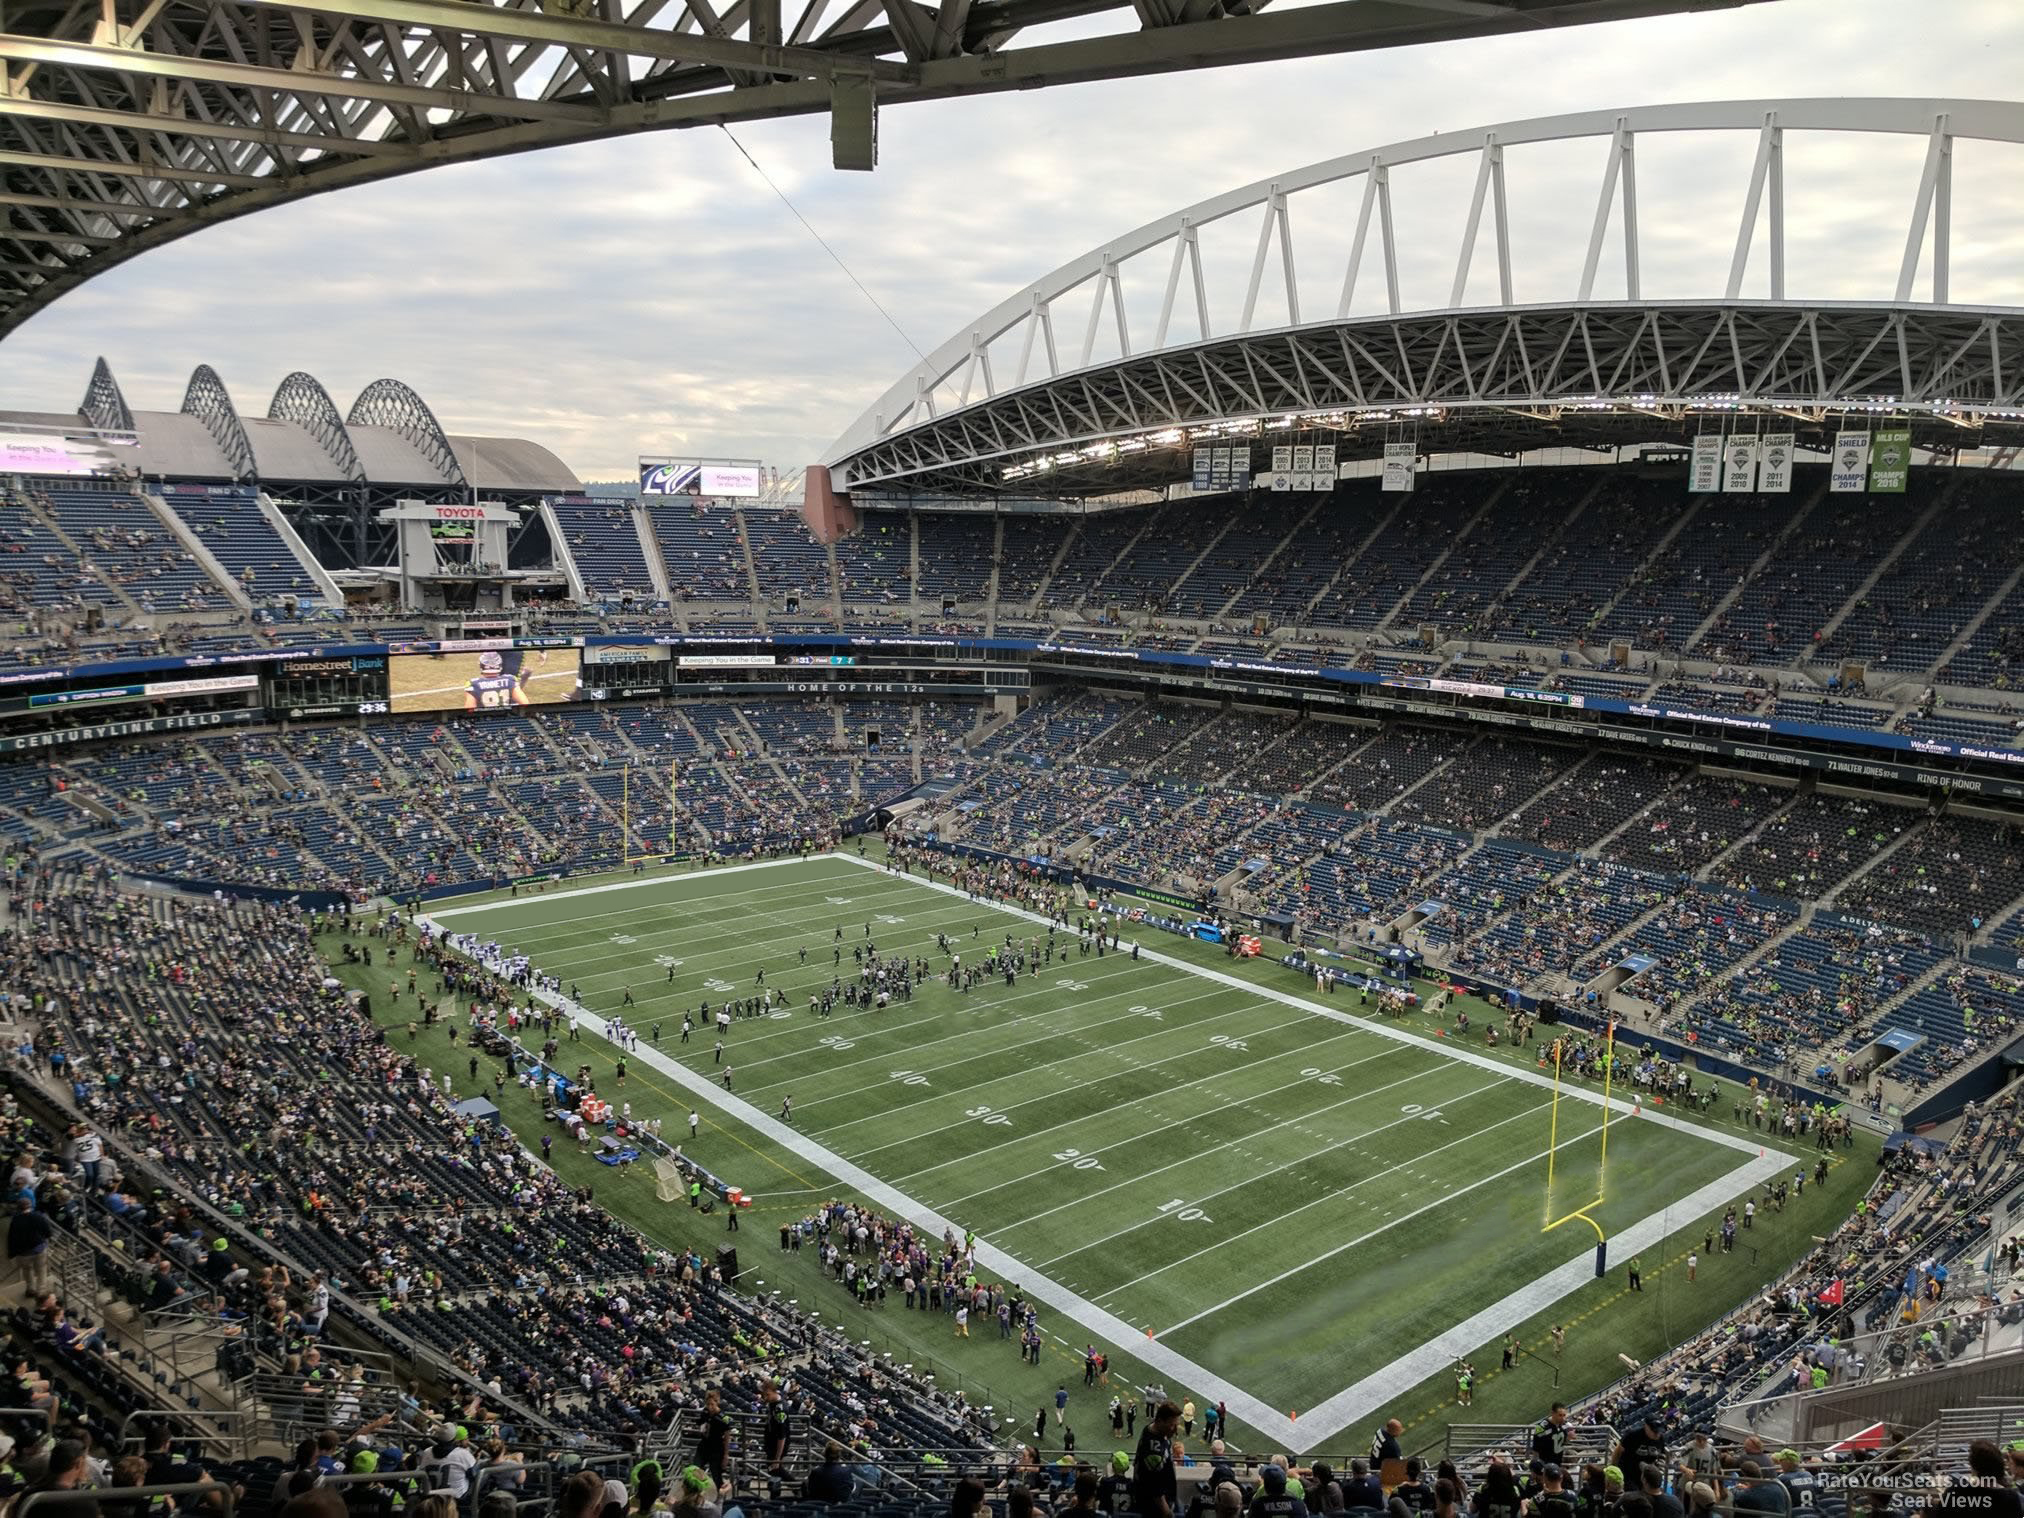 Seahawks Seating Chart With Rows